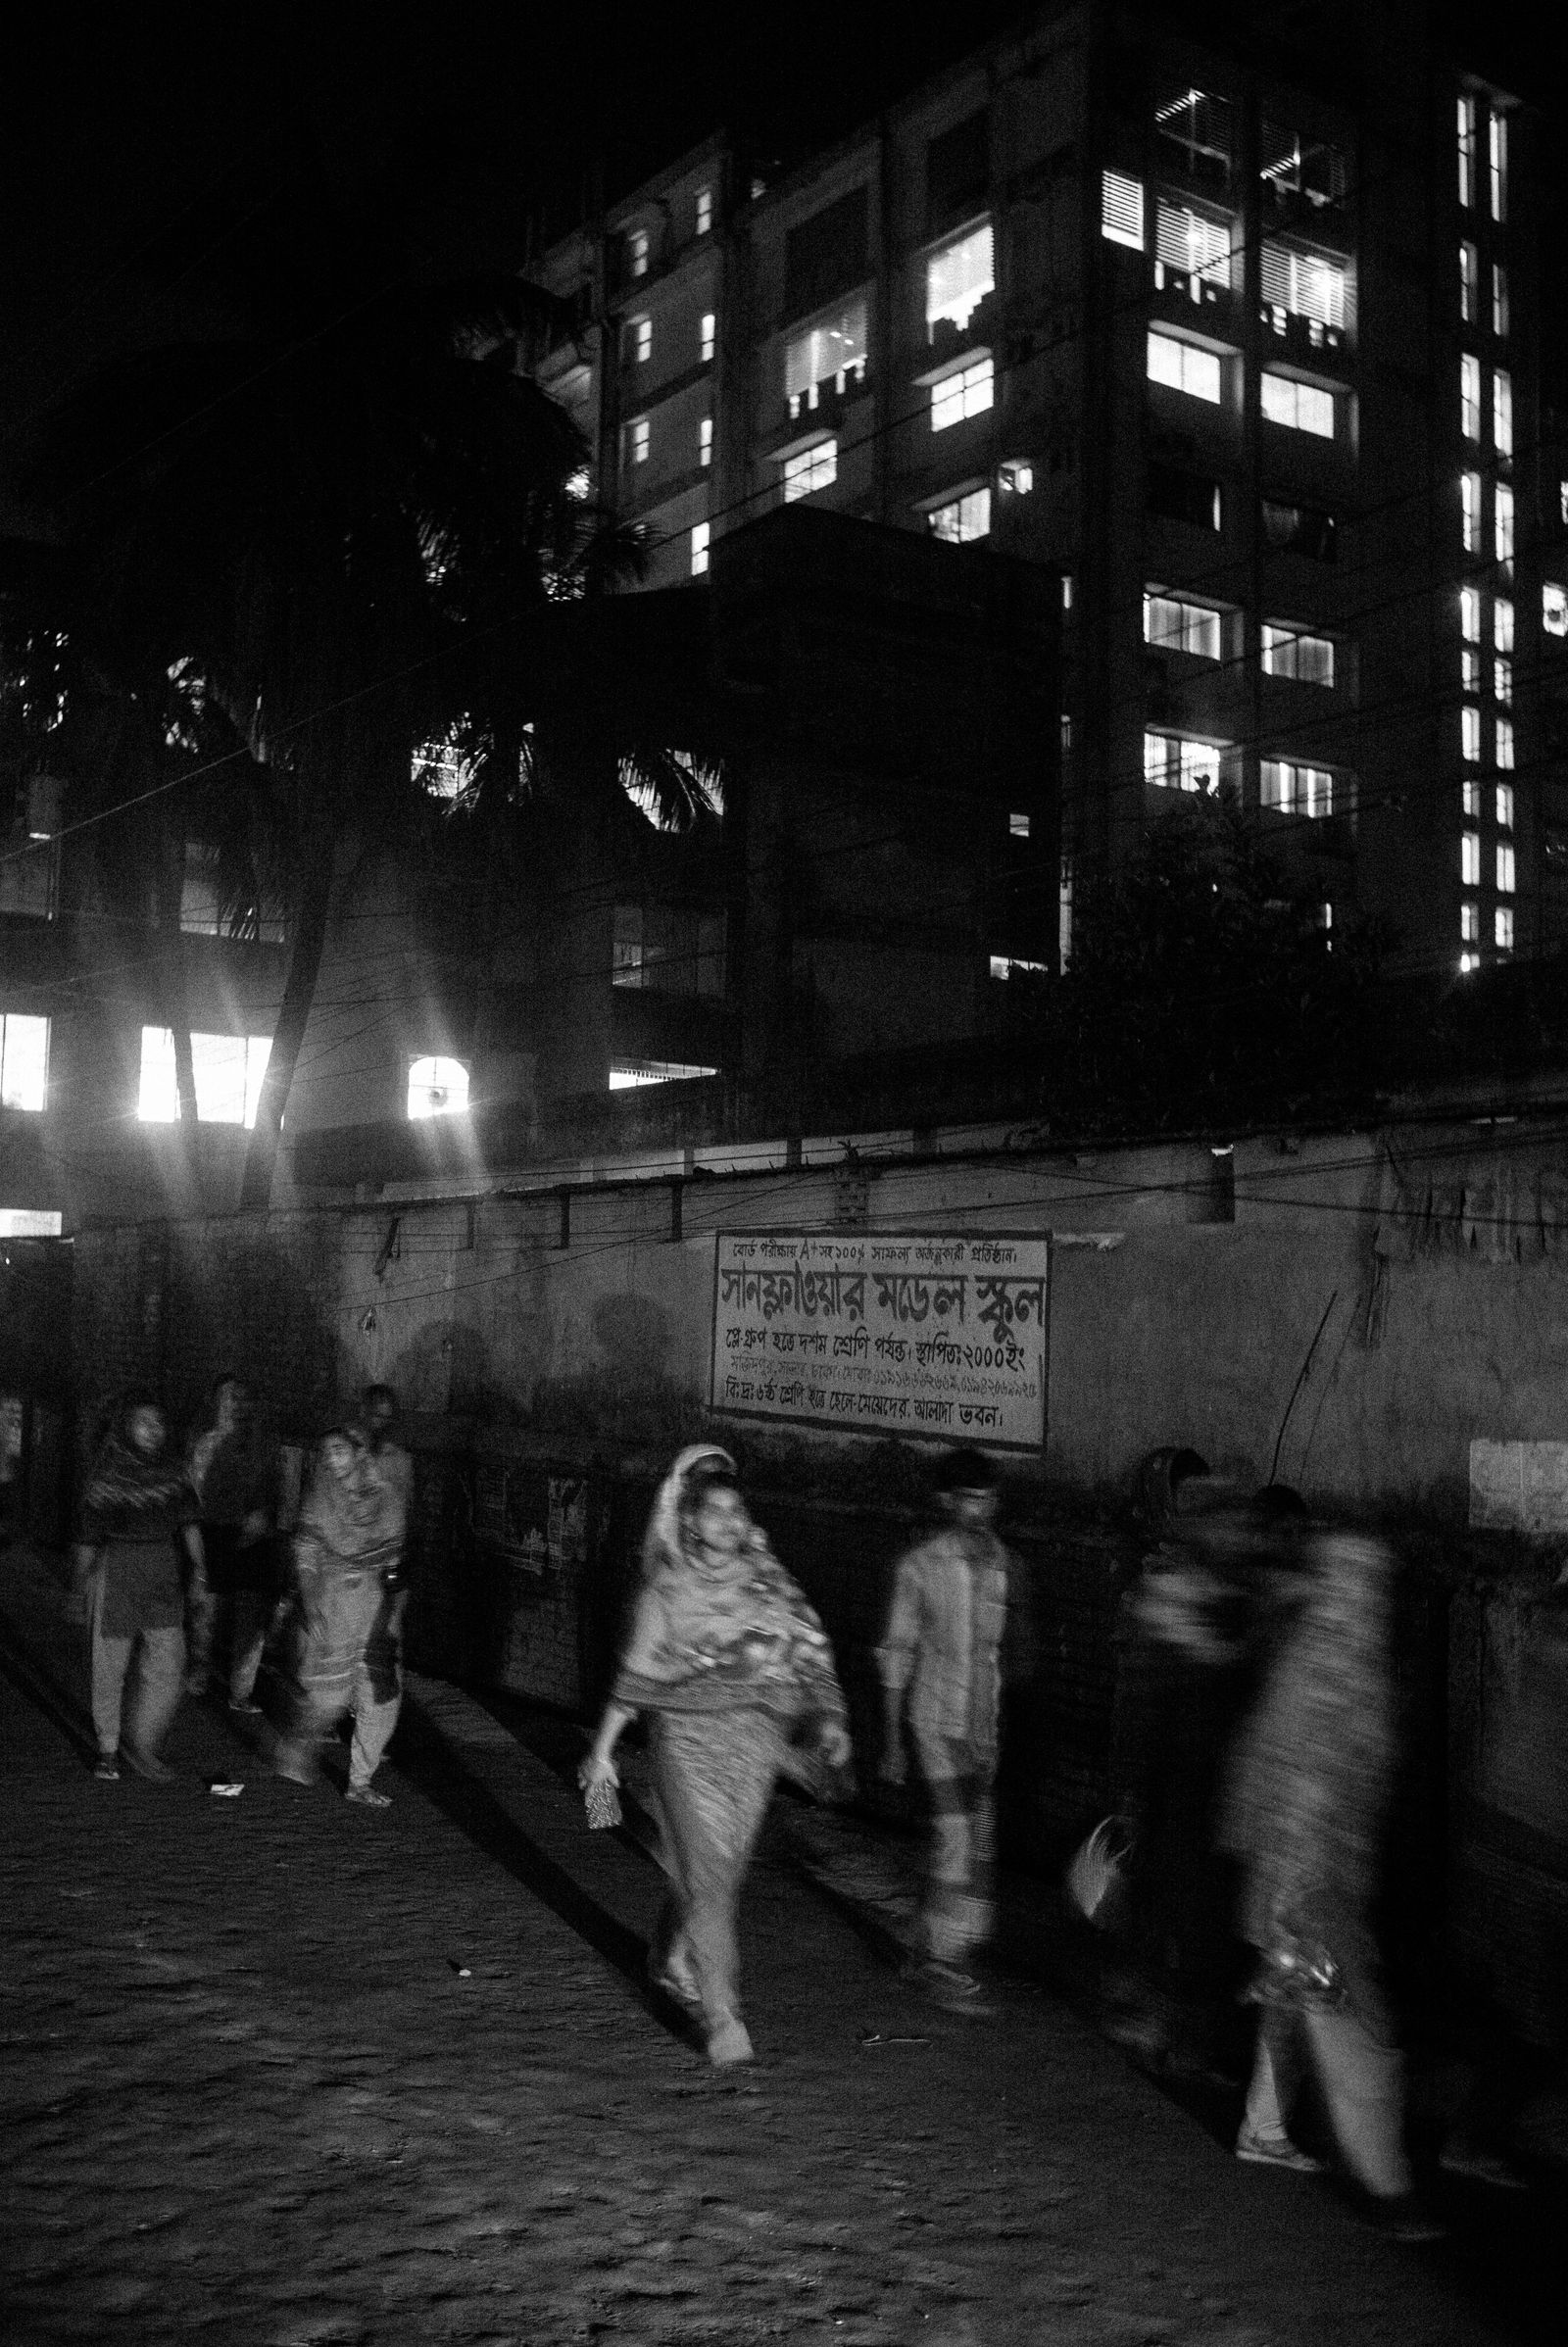 © Jost Franko - Garment workers leave the factory (in the back) after their shift in Dhaka, Bangladesh, on March 9th 2016.